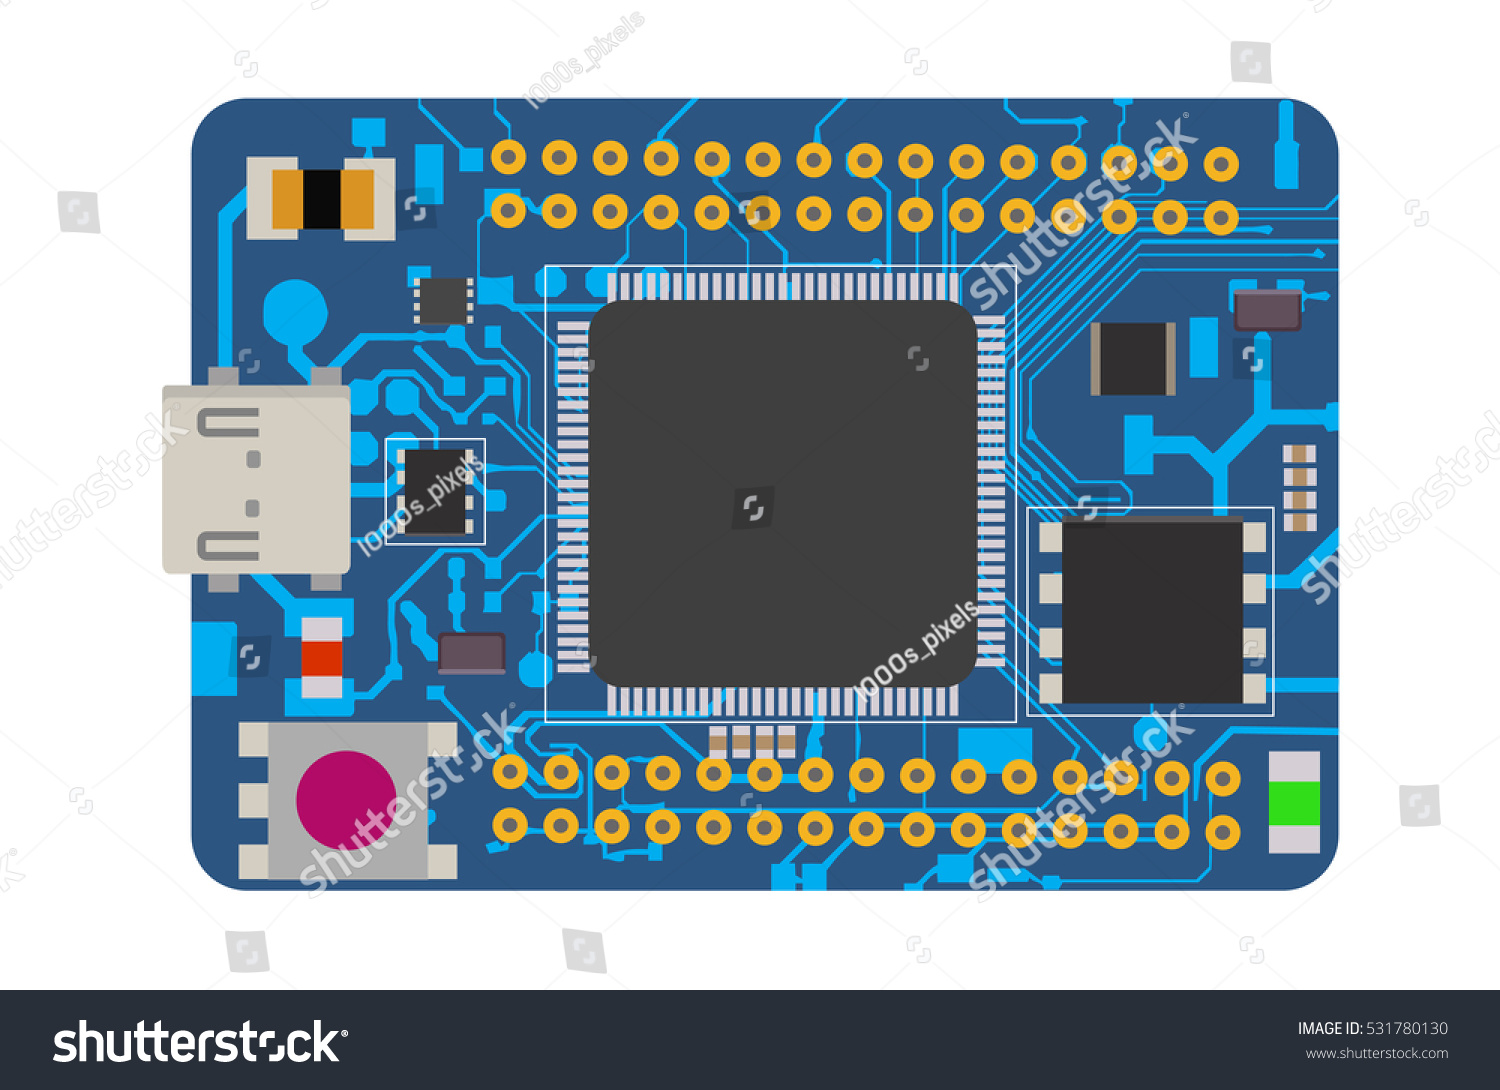 SVG of DIY electronic mega board with a micro-controller, LEDs, connectors, and other electronic components, to form the basic of smart home, robotic, and many other projects related to electronics. svg